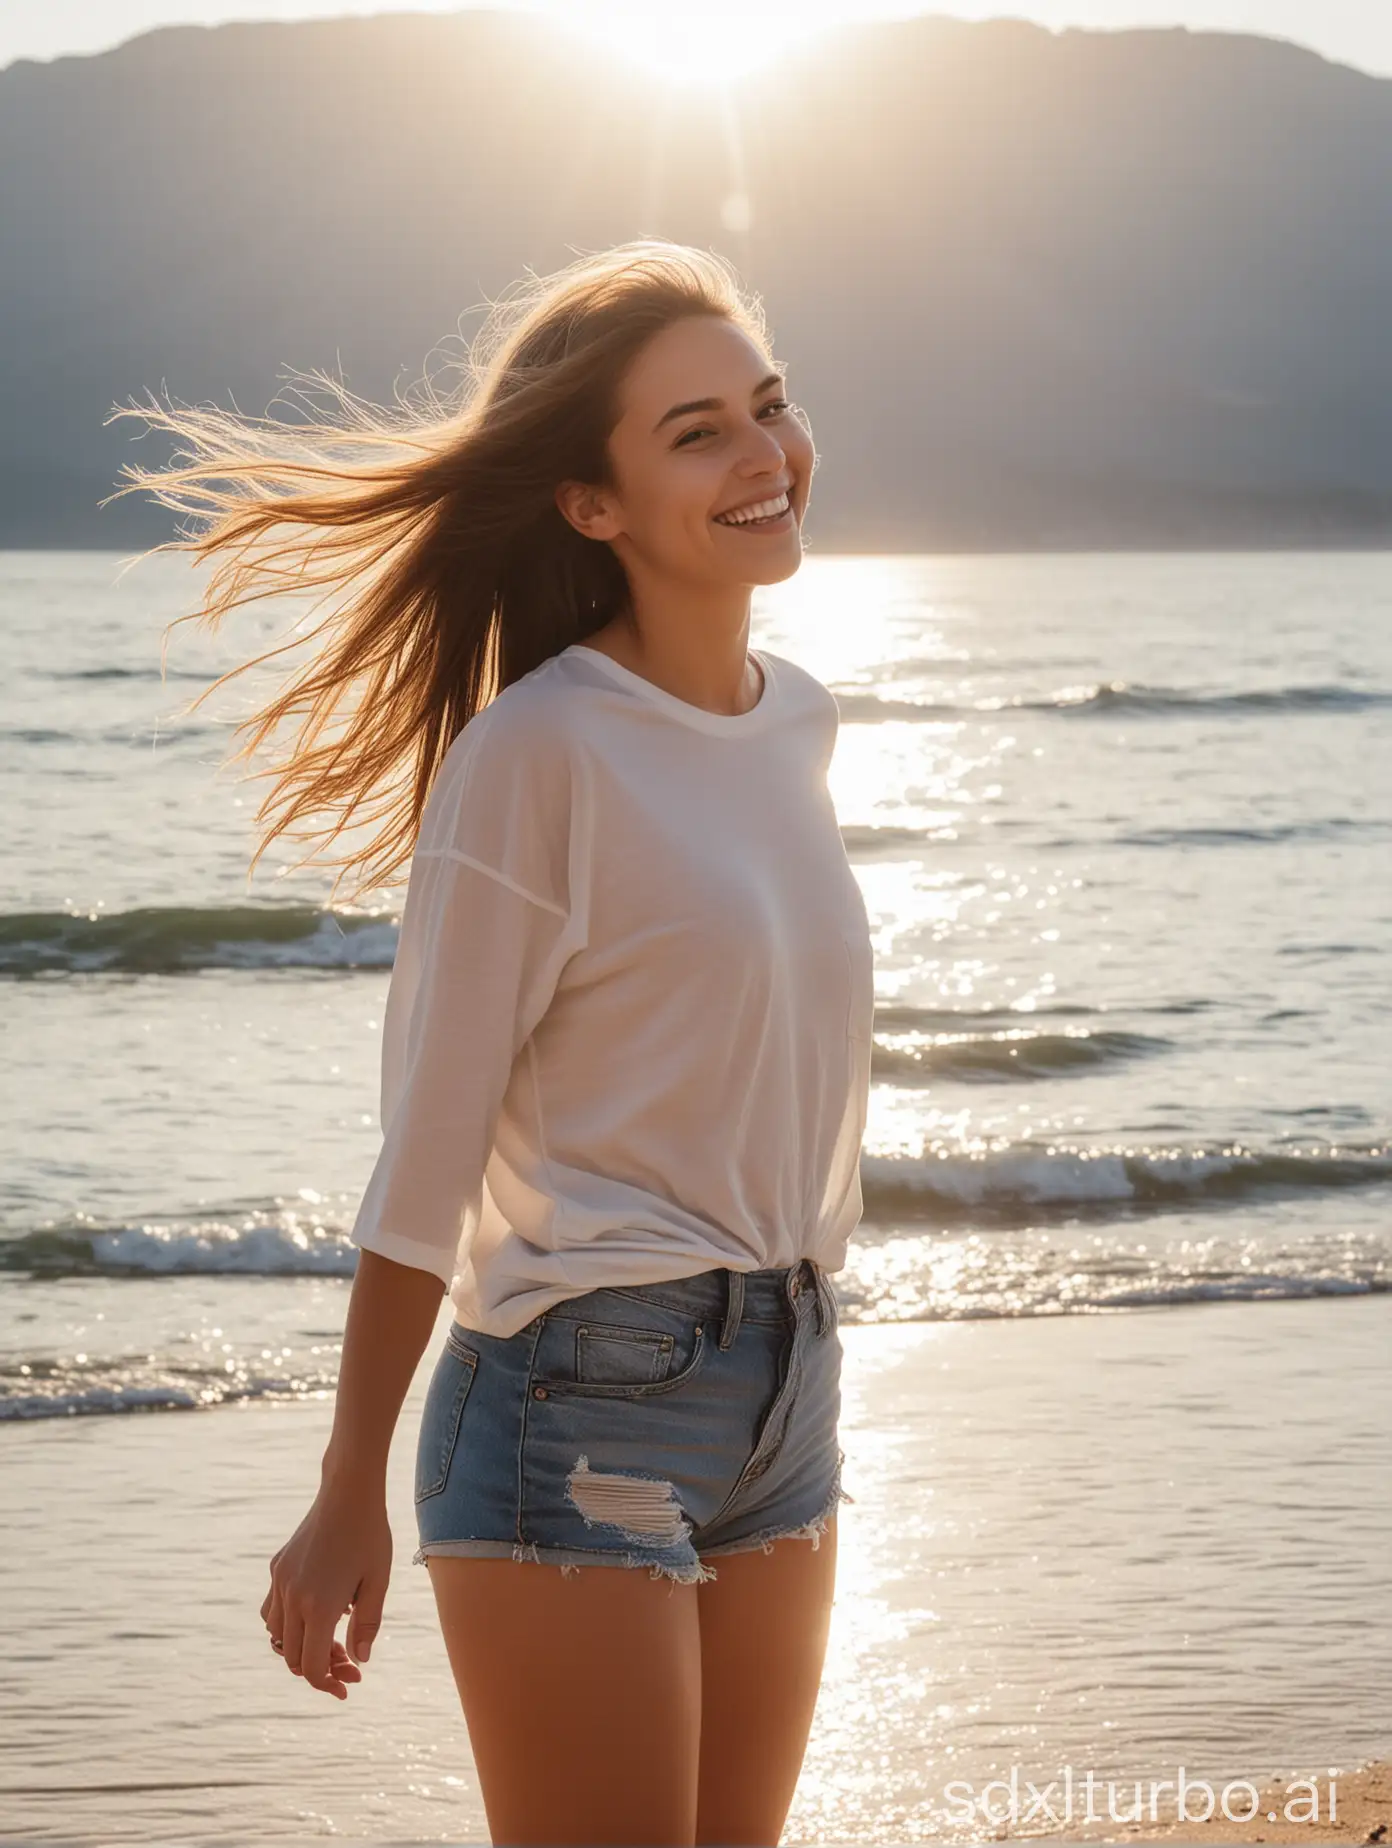 A woman, a young woman, in a day T-shirt and jean shorts, standing on the beach, the sun pouring down on her, looking back and smiling, half a body, long hair flying, beautiful, daylight